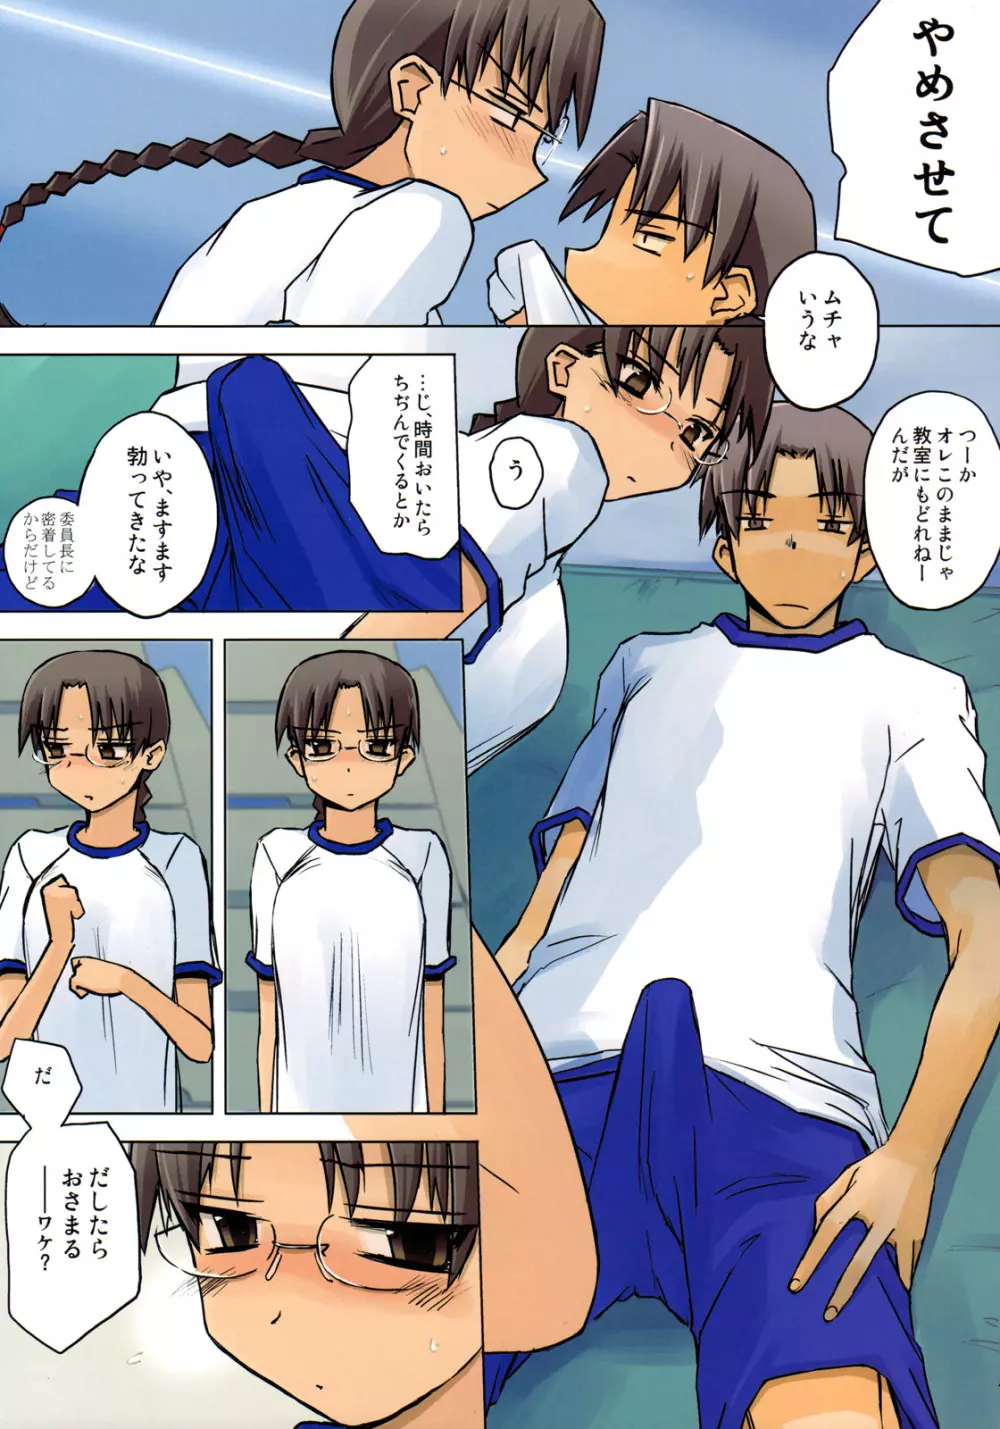 Physical education 11ページ